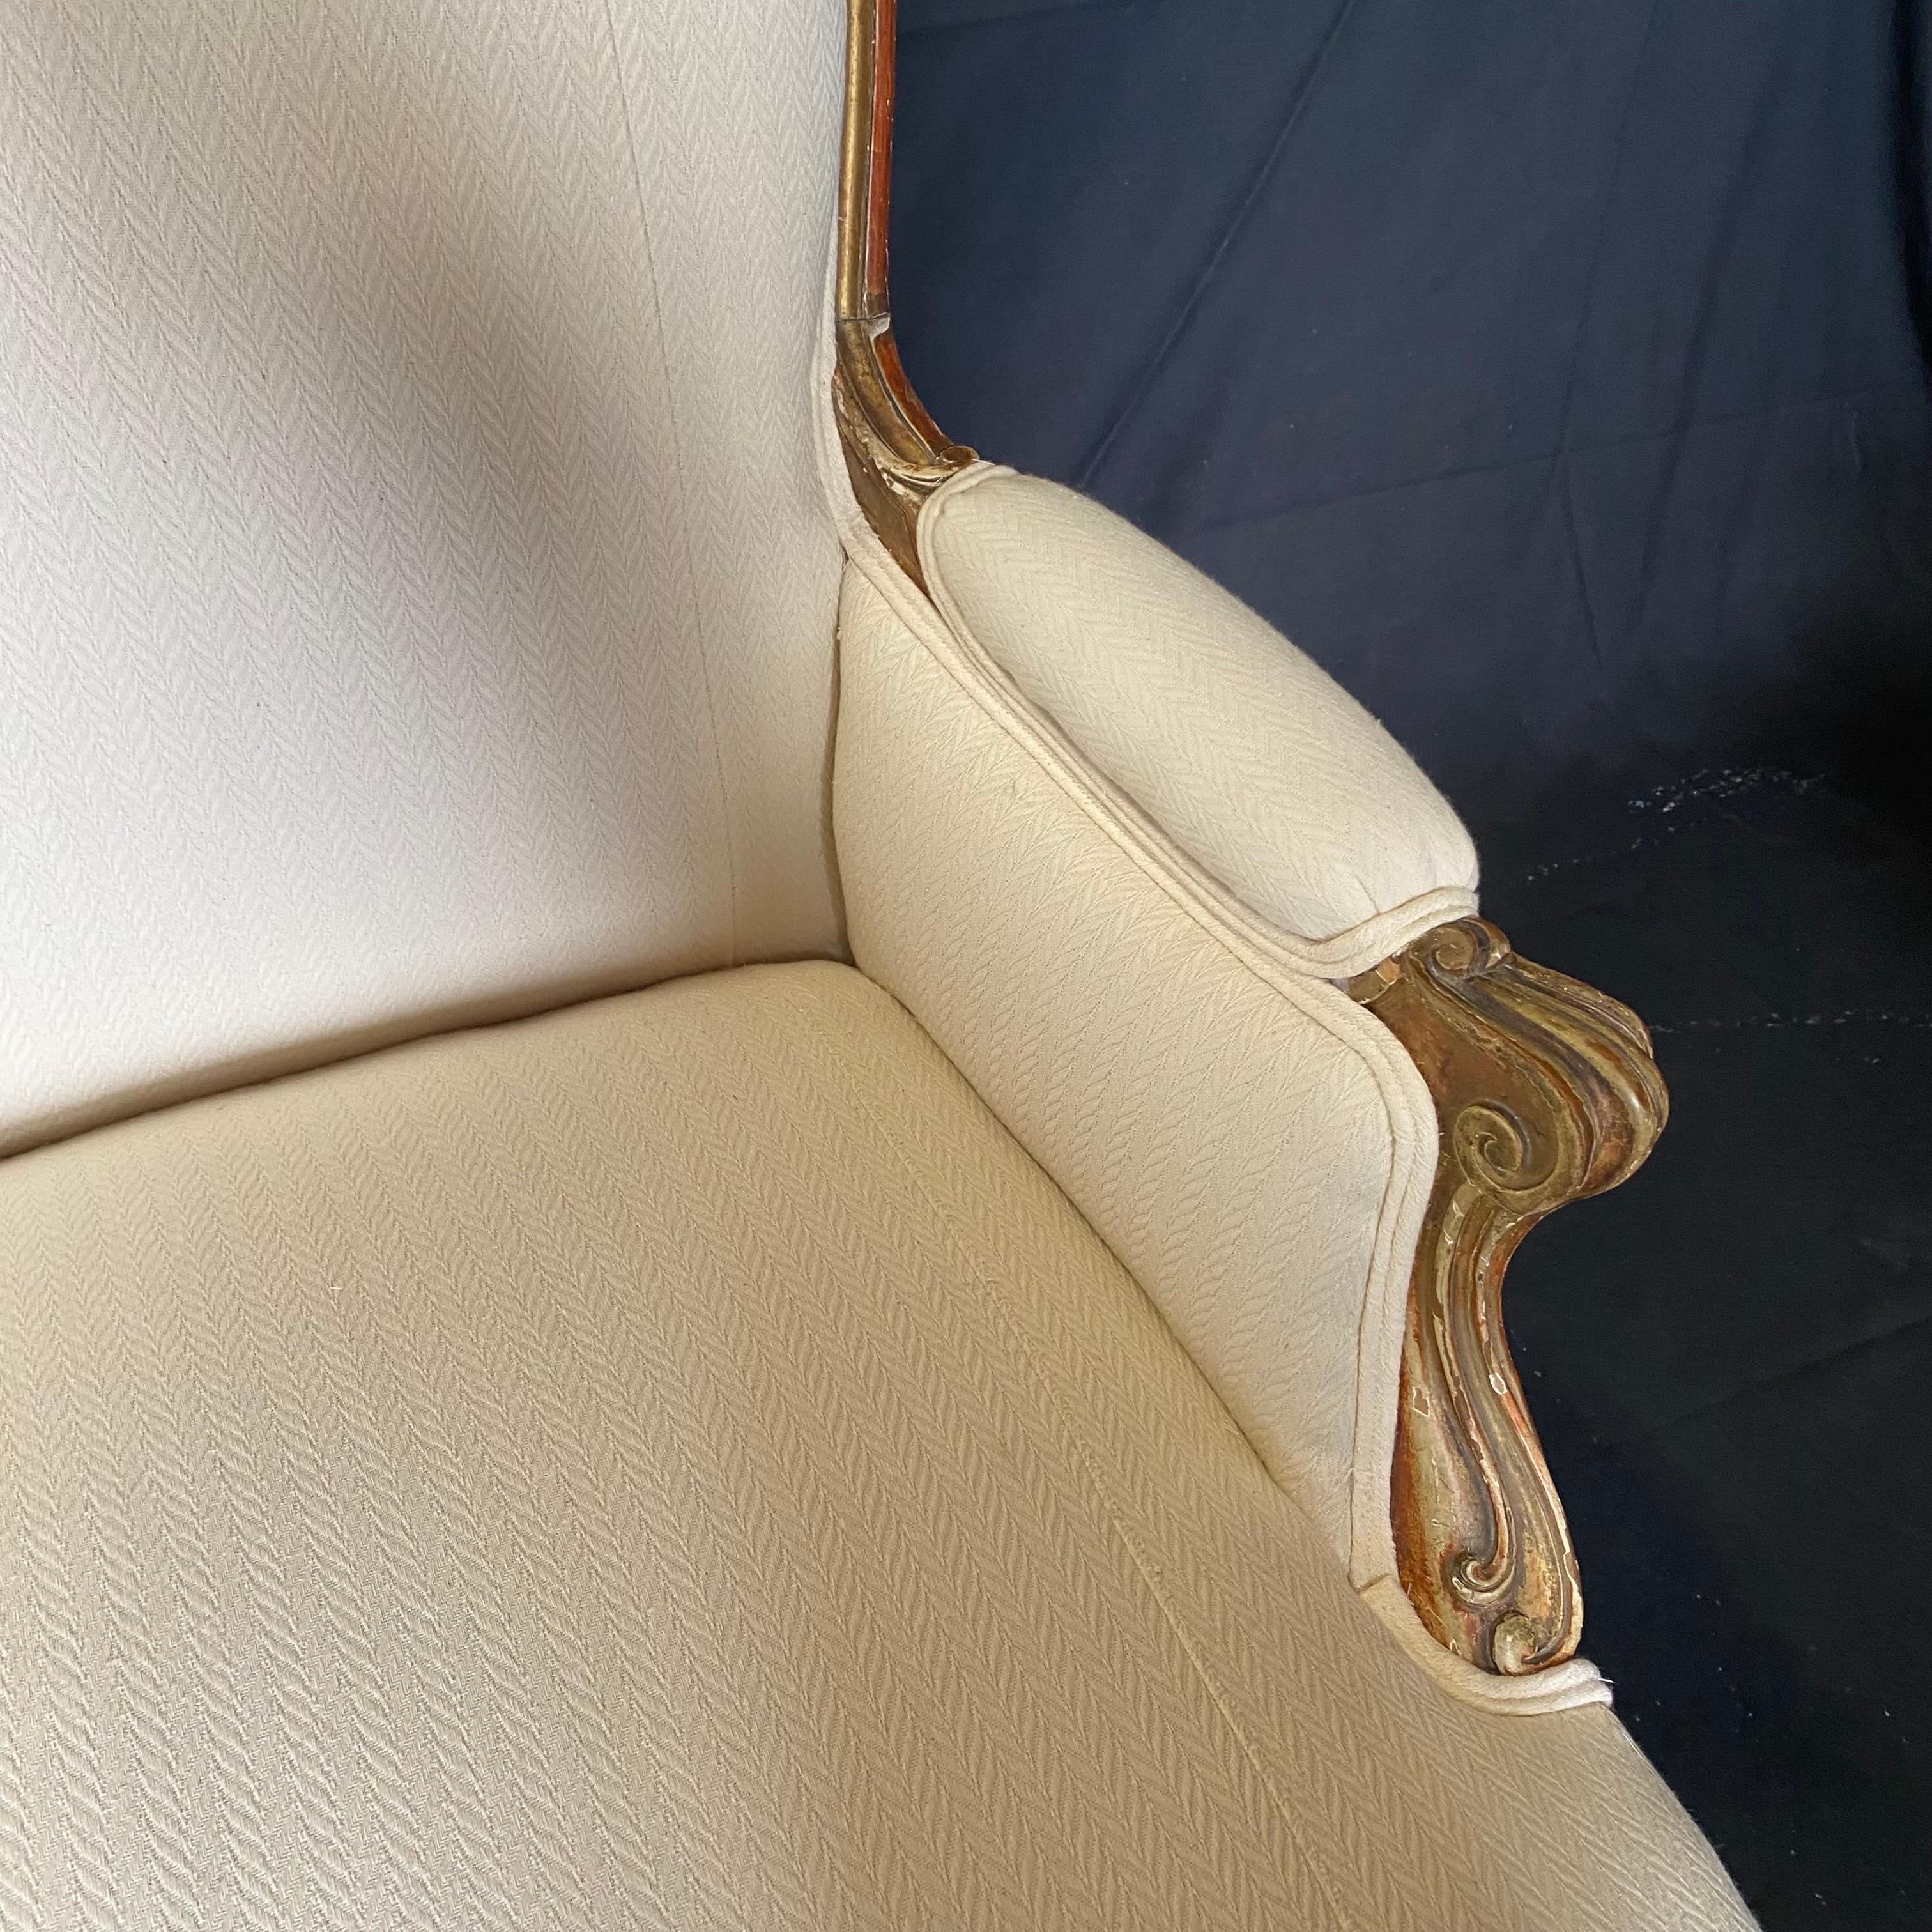 Superb quality, elegant, 19th century French Louis XV canape, settee or sofa, reupholstered in neutal creamy fabric.   It has a beautifully shaped giltwood frame with a lovely flowing Rococo style, serpentine front and cabriole legs, front and rear.